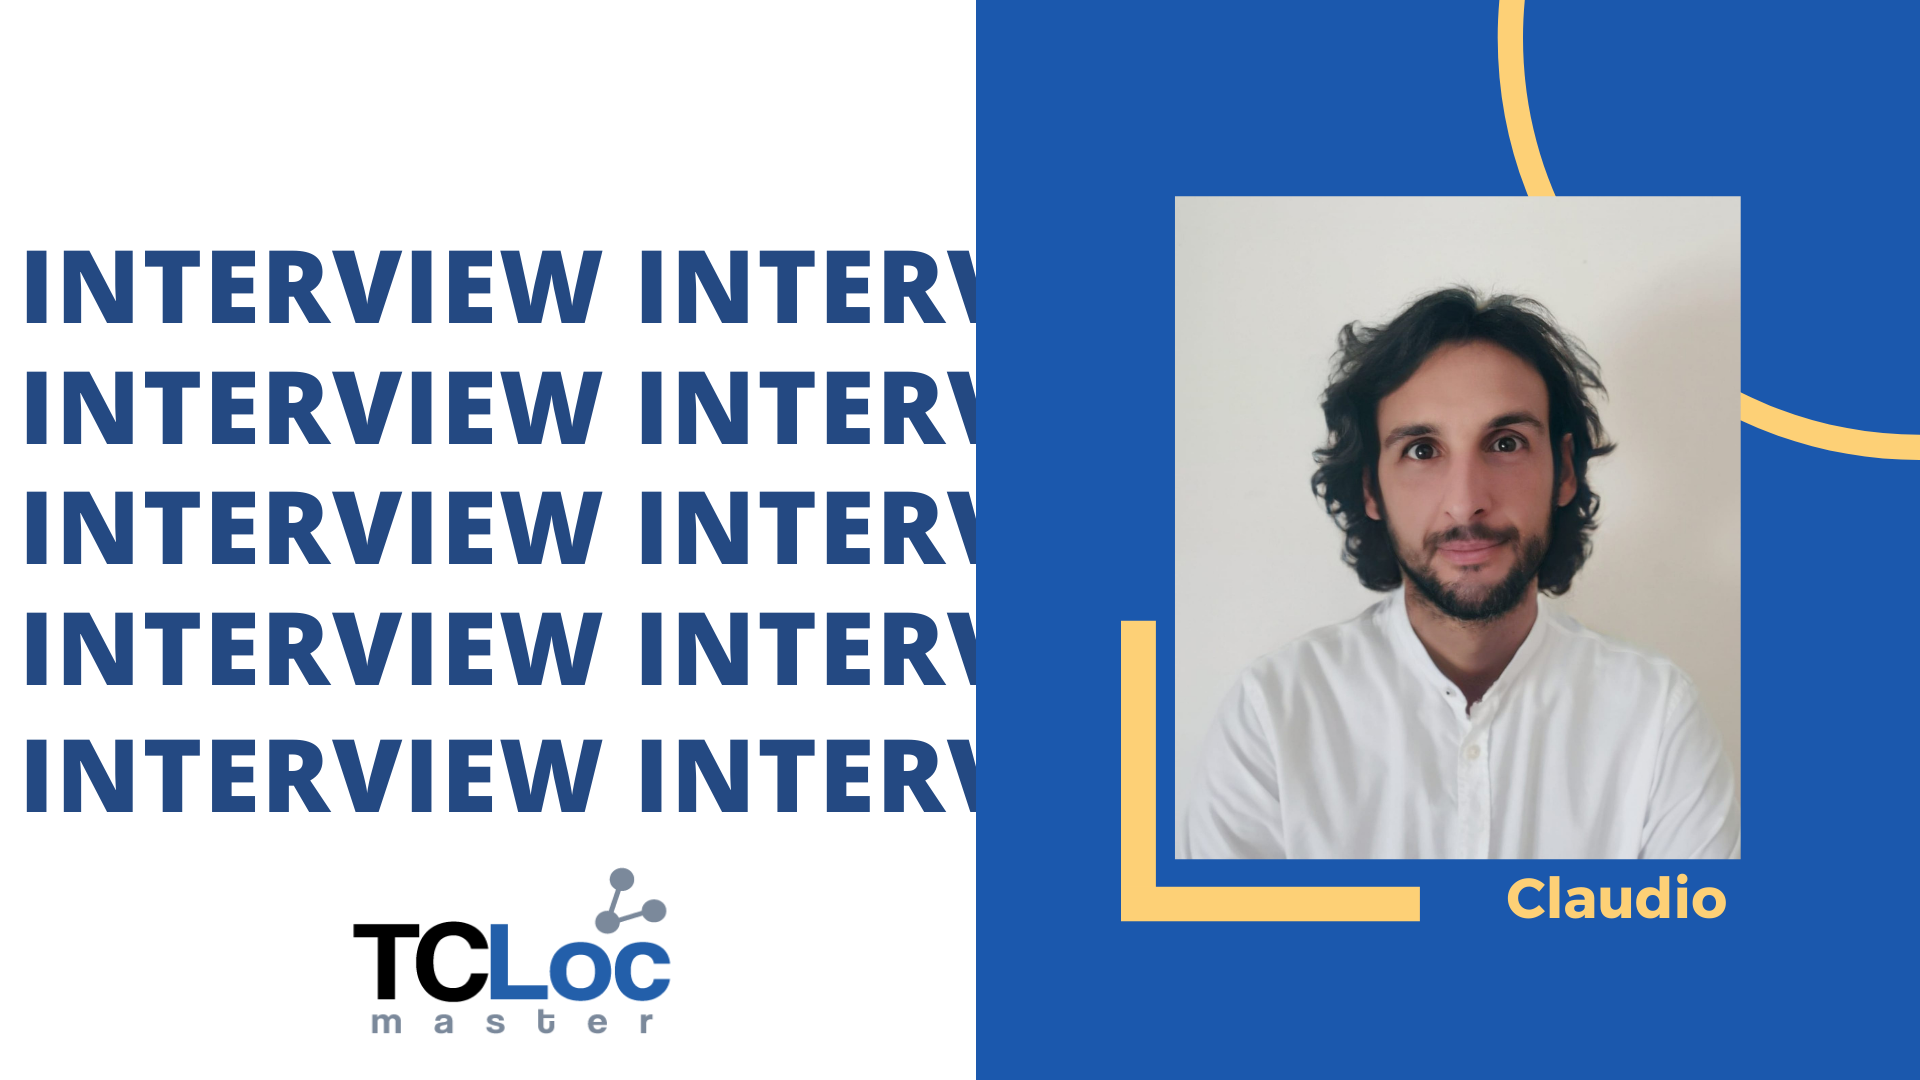 Interviews with TCLoc students: meet Claudio